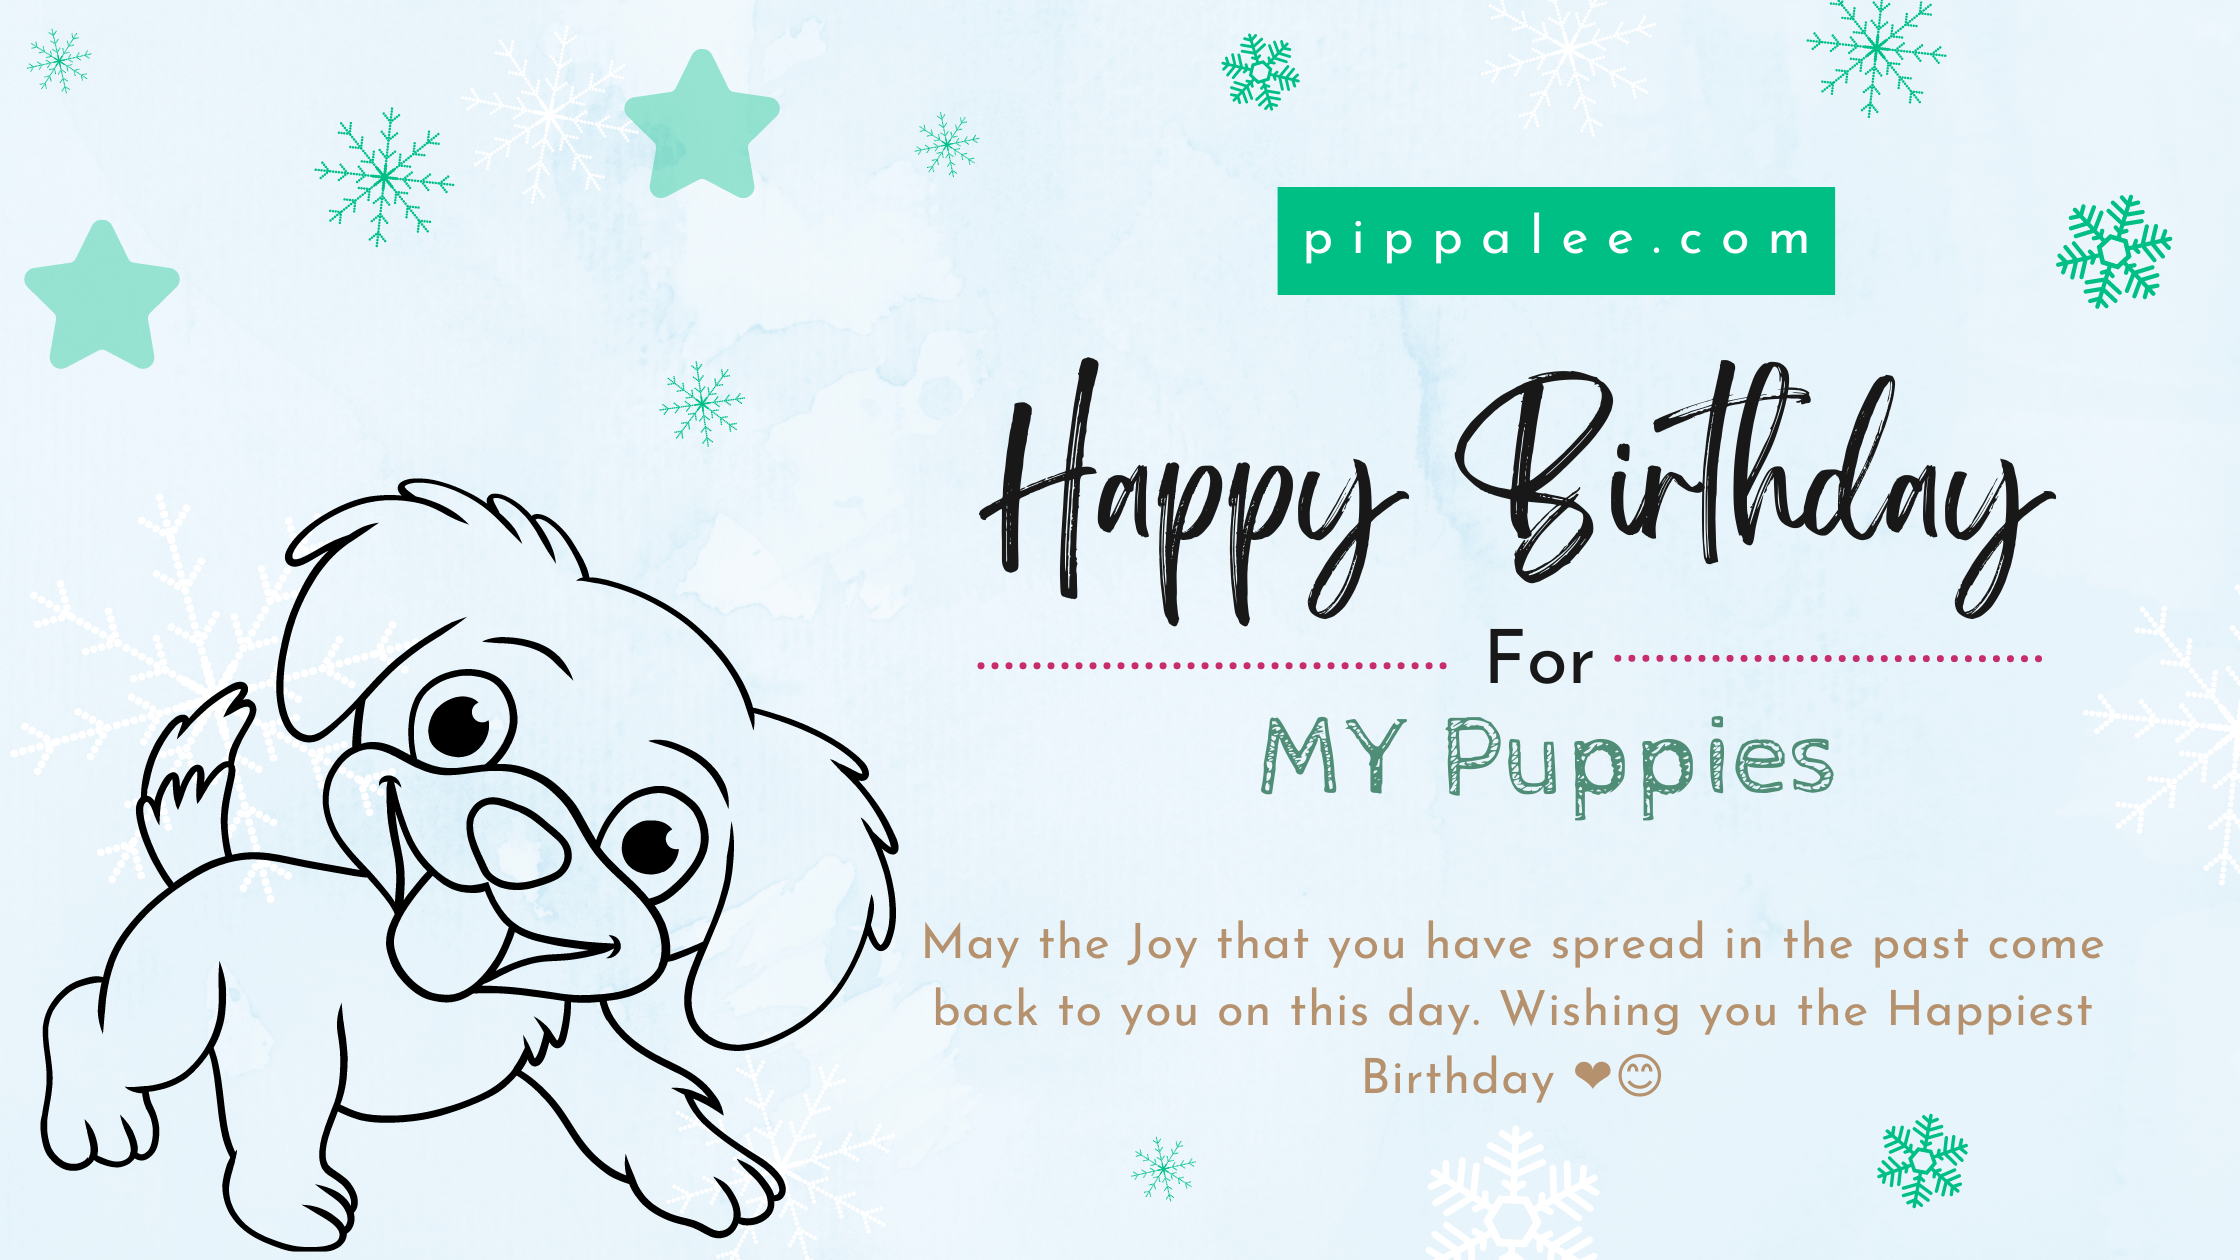 Happy Birthday To My Puppies - Wishes & Messages